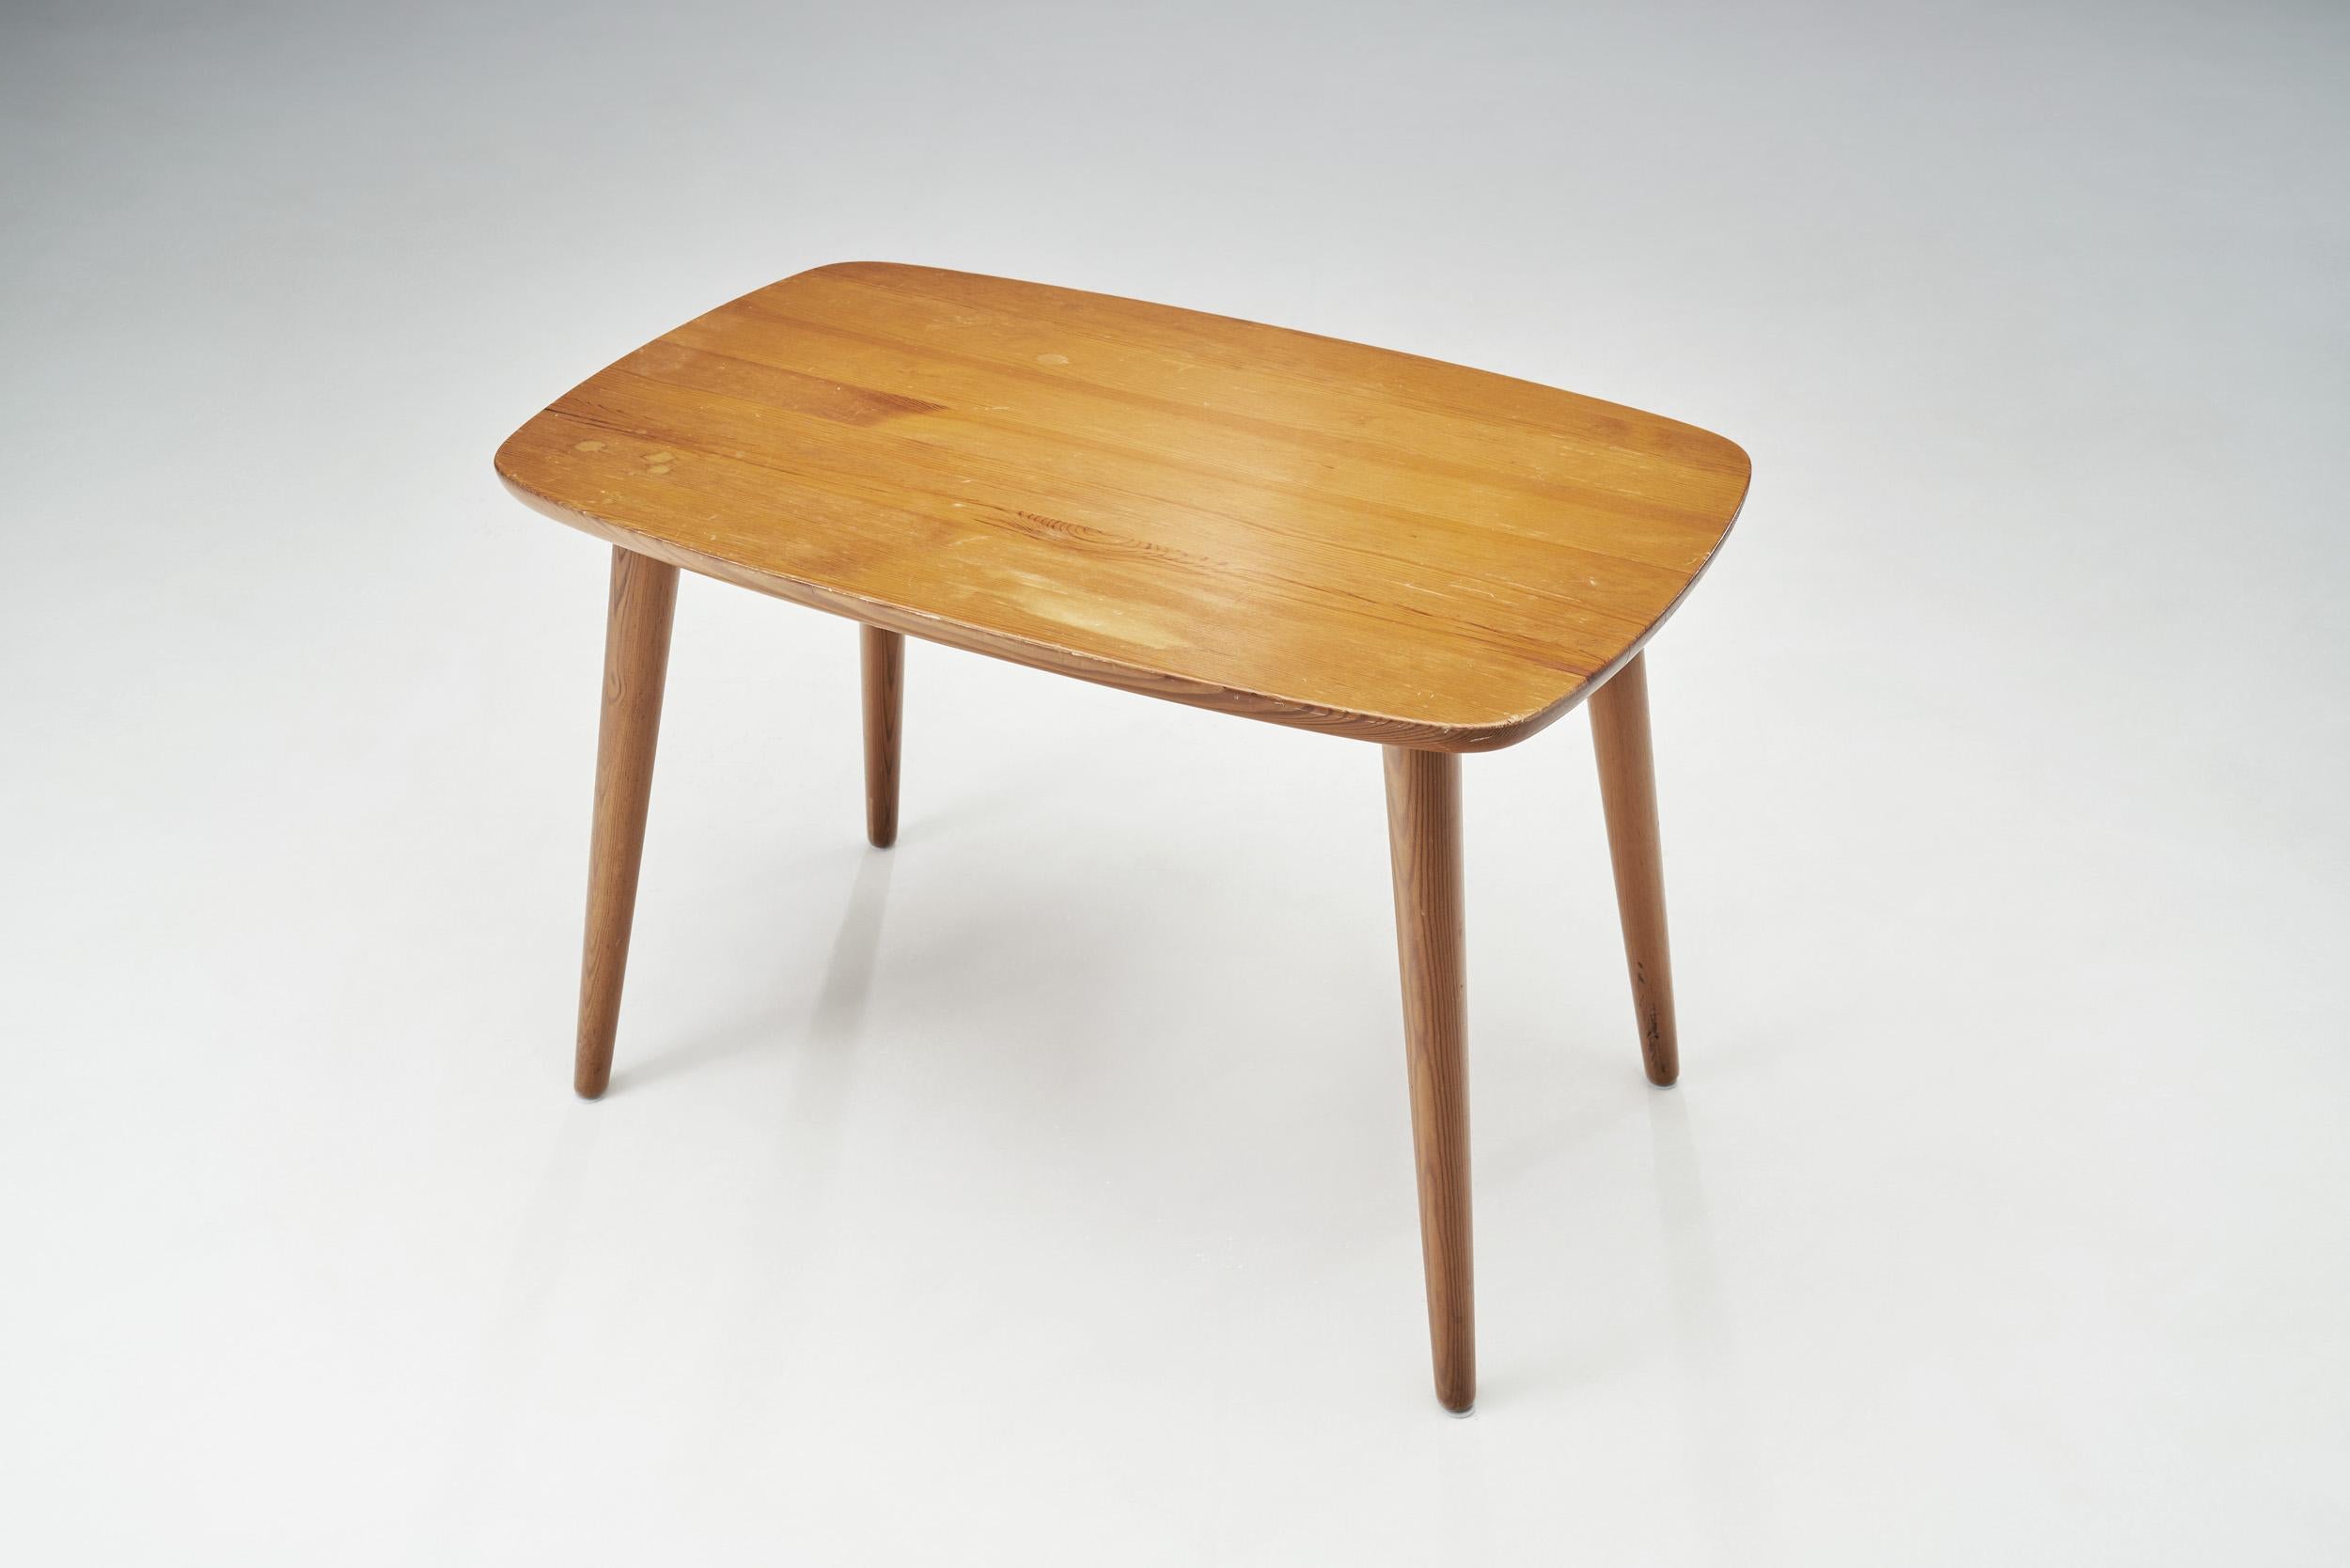 Mid-20th Century Göran Malmvall Pine Coffee Table for Svensk Fur, Sweden 1940s For Sale